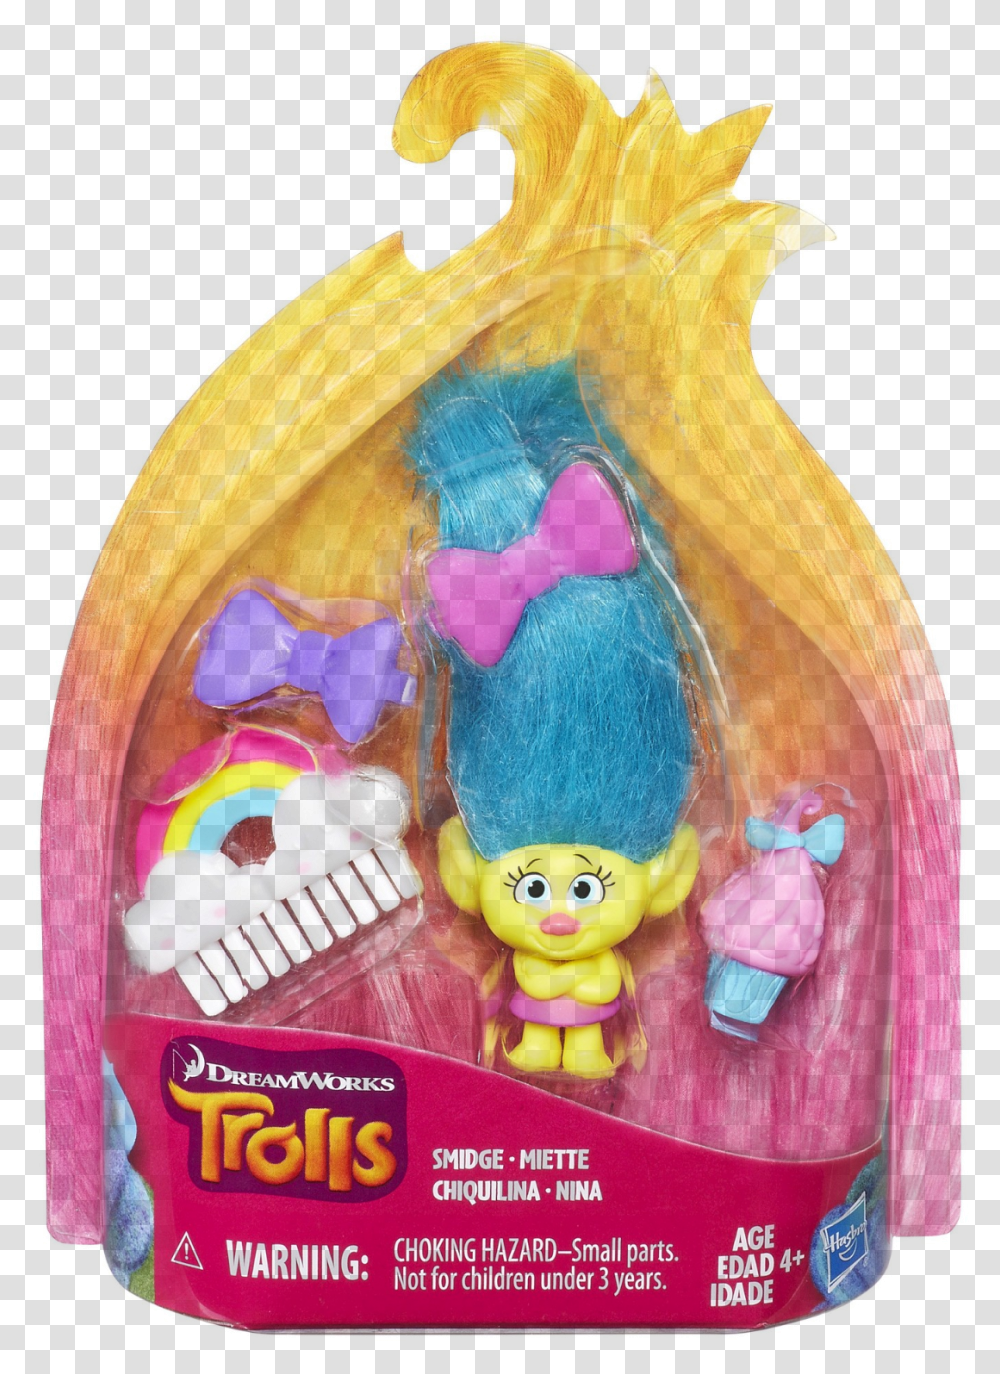 Trolls Toys Hasbro Dreamworks Trolls, Sweets, Food, Confectionery, Candy Transparent Png